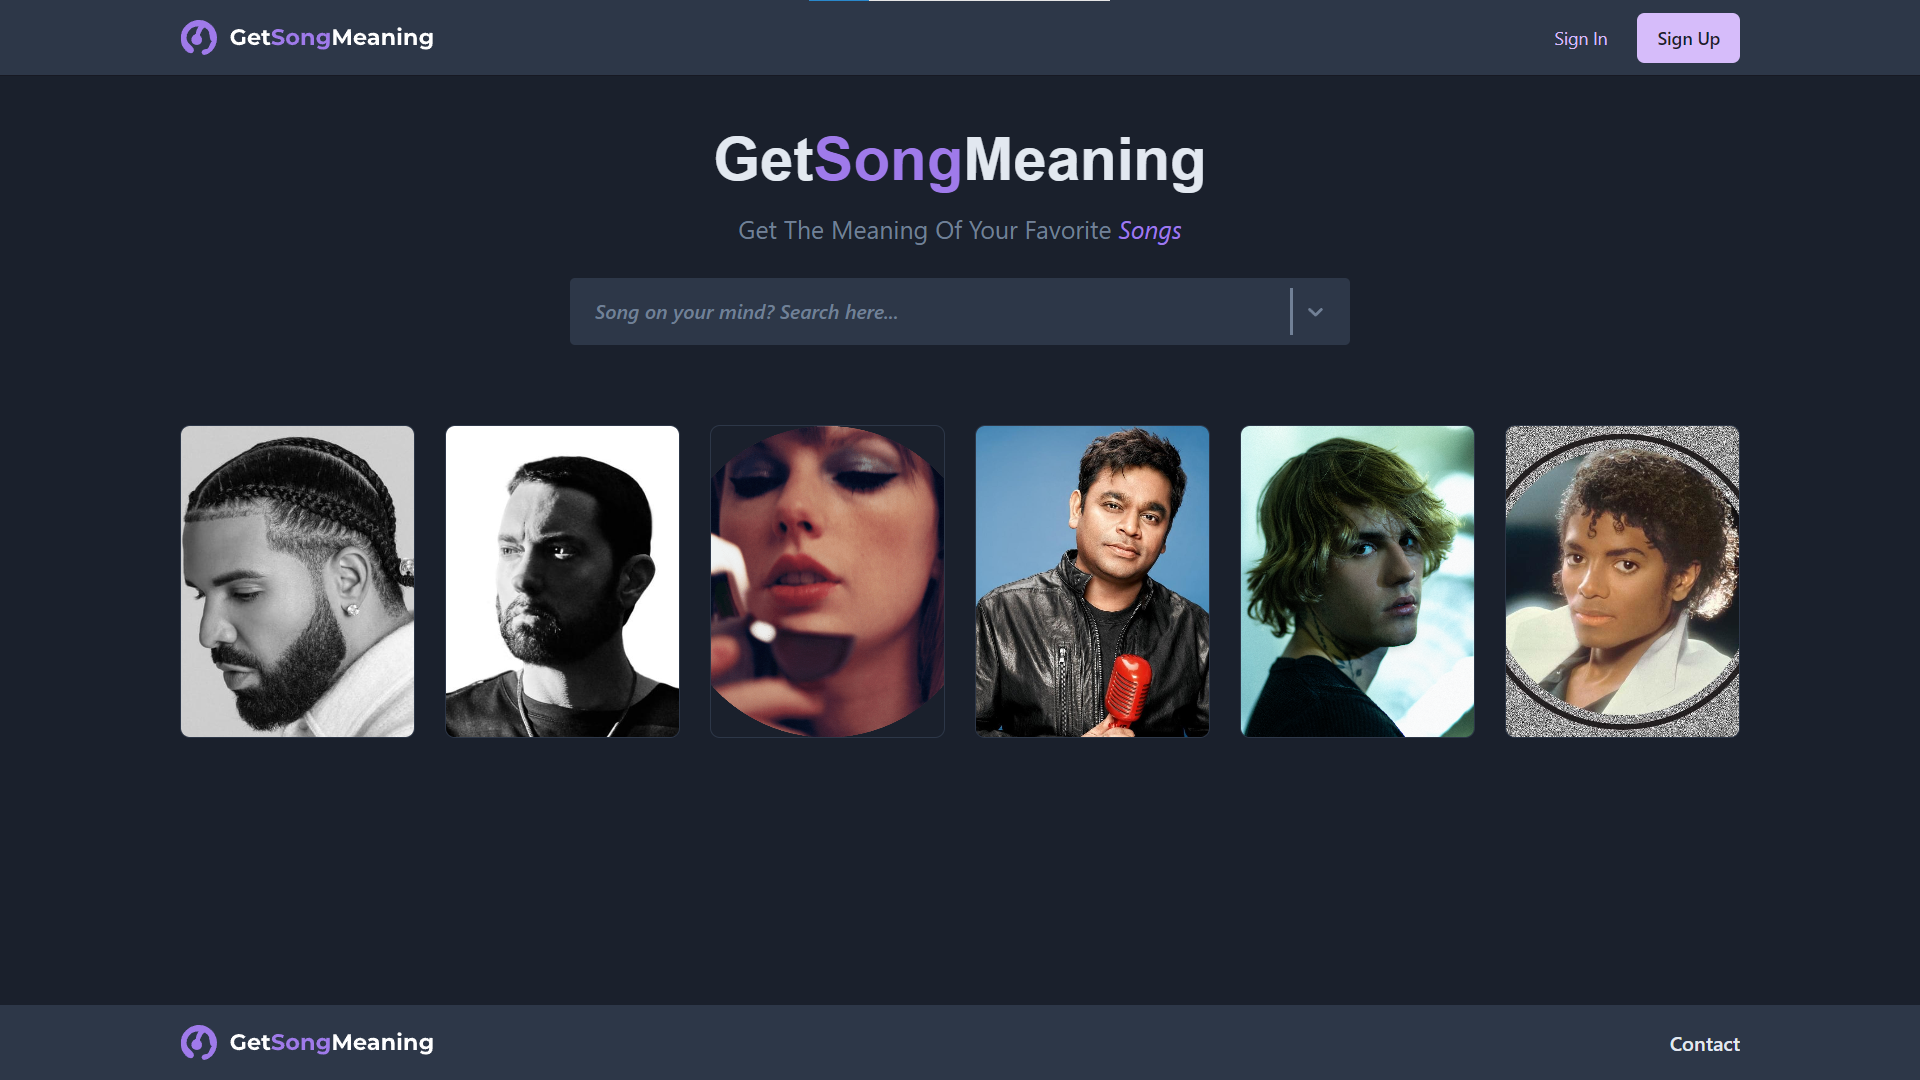 WhatTheBeat - A tool to get songs meanings